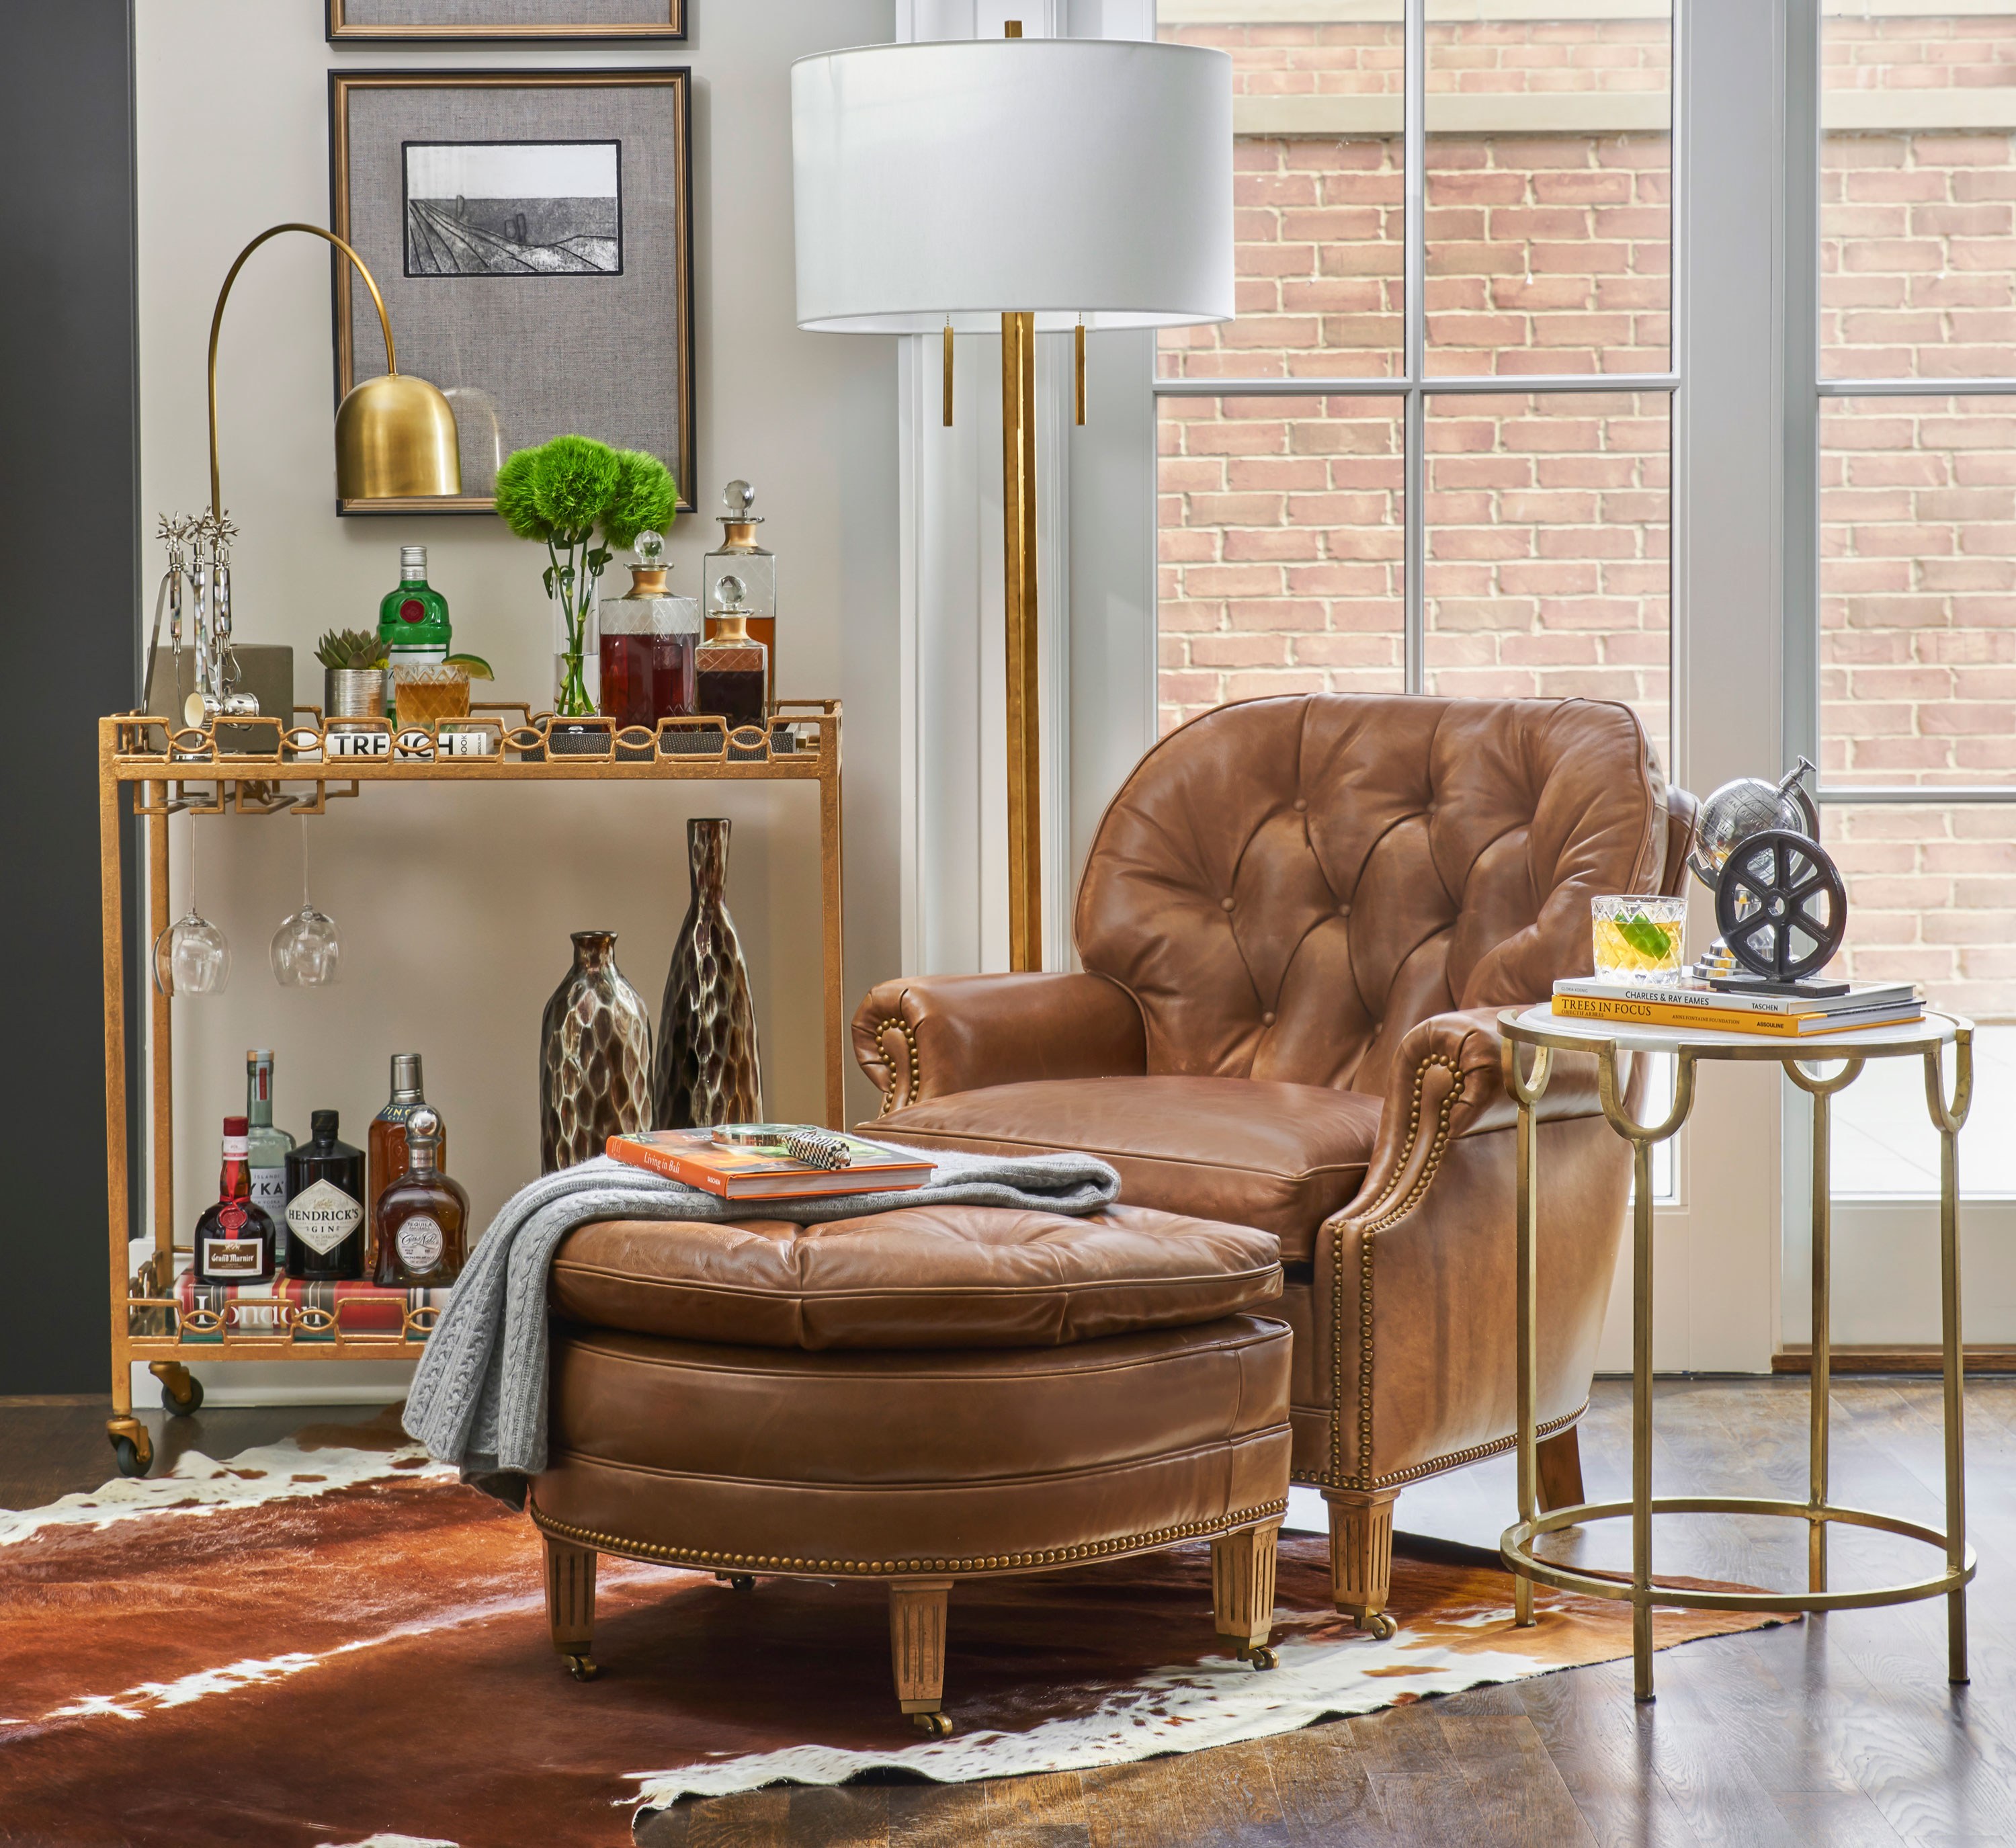 “Bar carts are both functional and decorative. They are a great addition to any entertaining space. While some prefer a fully stocked bar, it also can easily be used as an accent table.”